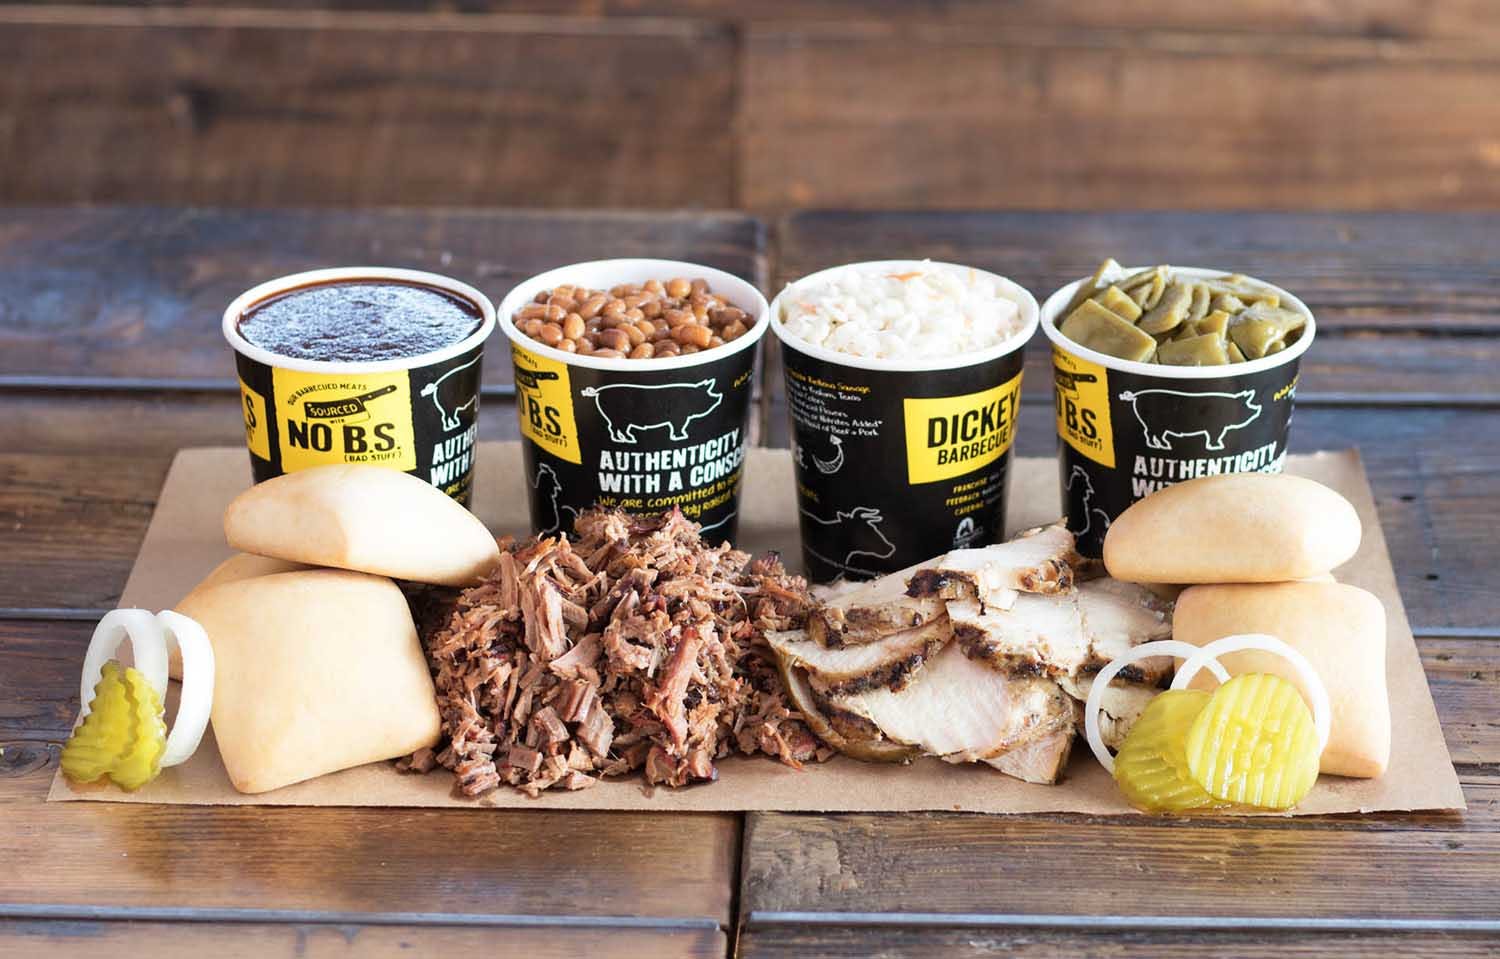 New Dickey’s Barbecue Pit in Pinole Kicks Off 3-Day Party